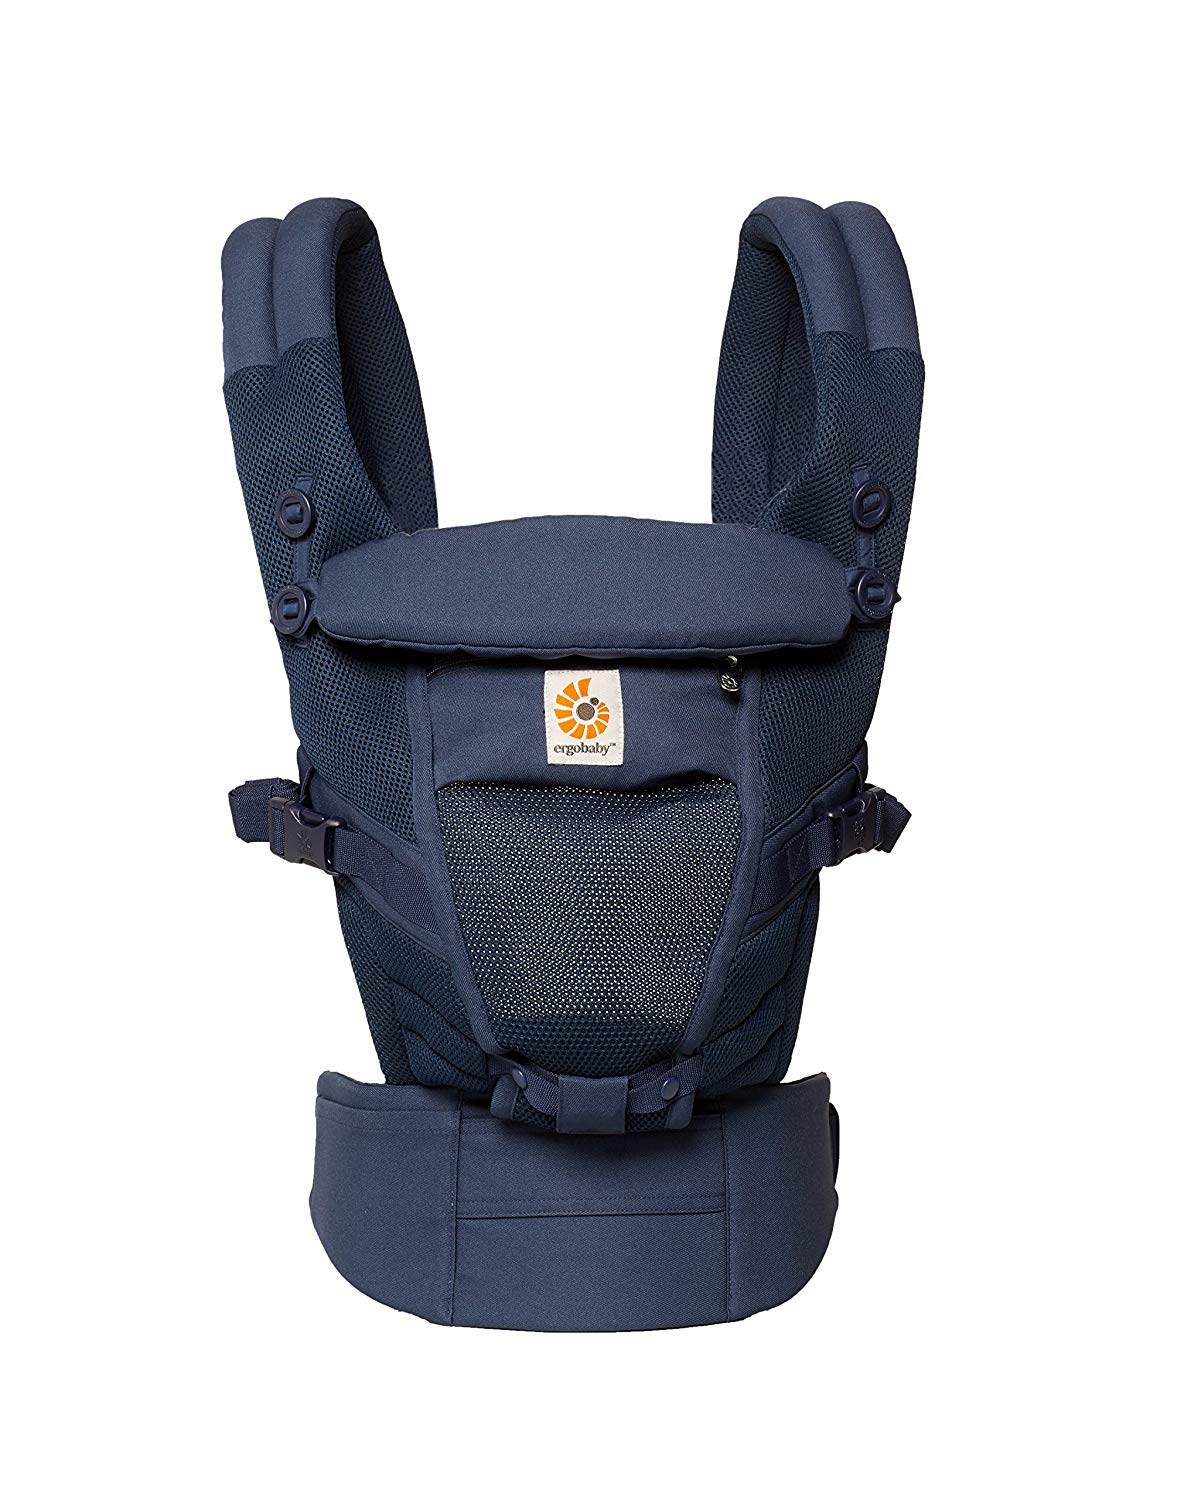 Ergobaby Baby Carrier For Newborns, Adaptable 3-Positions Comfortable Carri